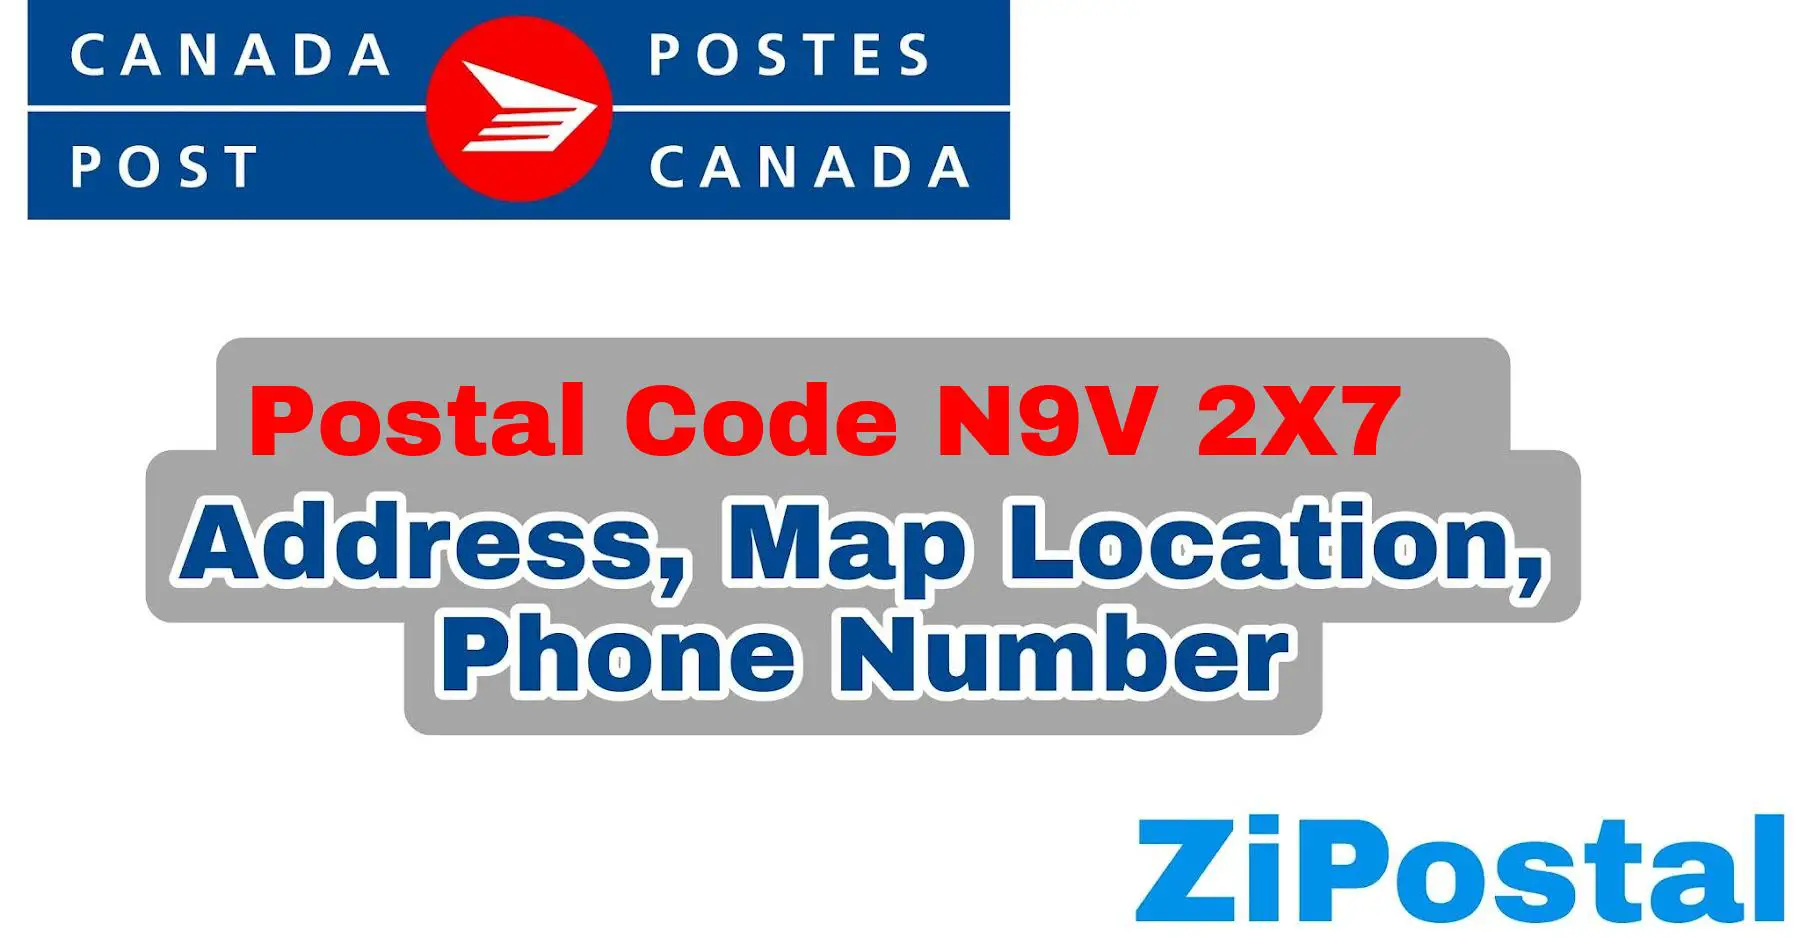 Postal Code N9V 2X7 Address Map Location and Phone Number